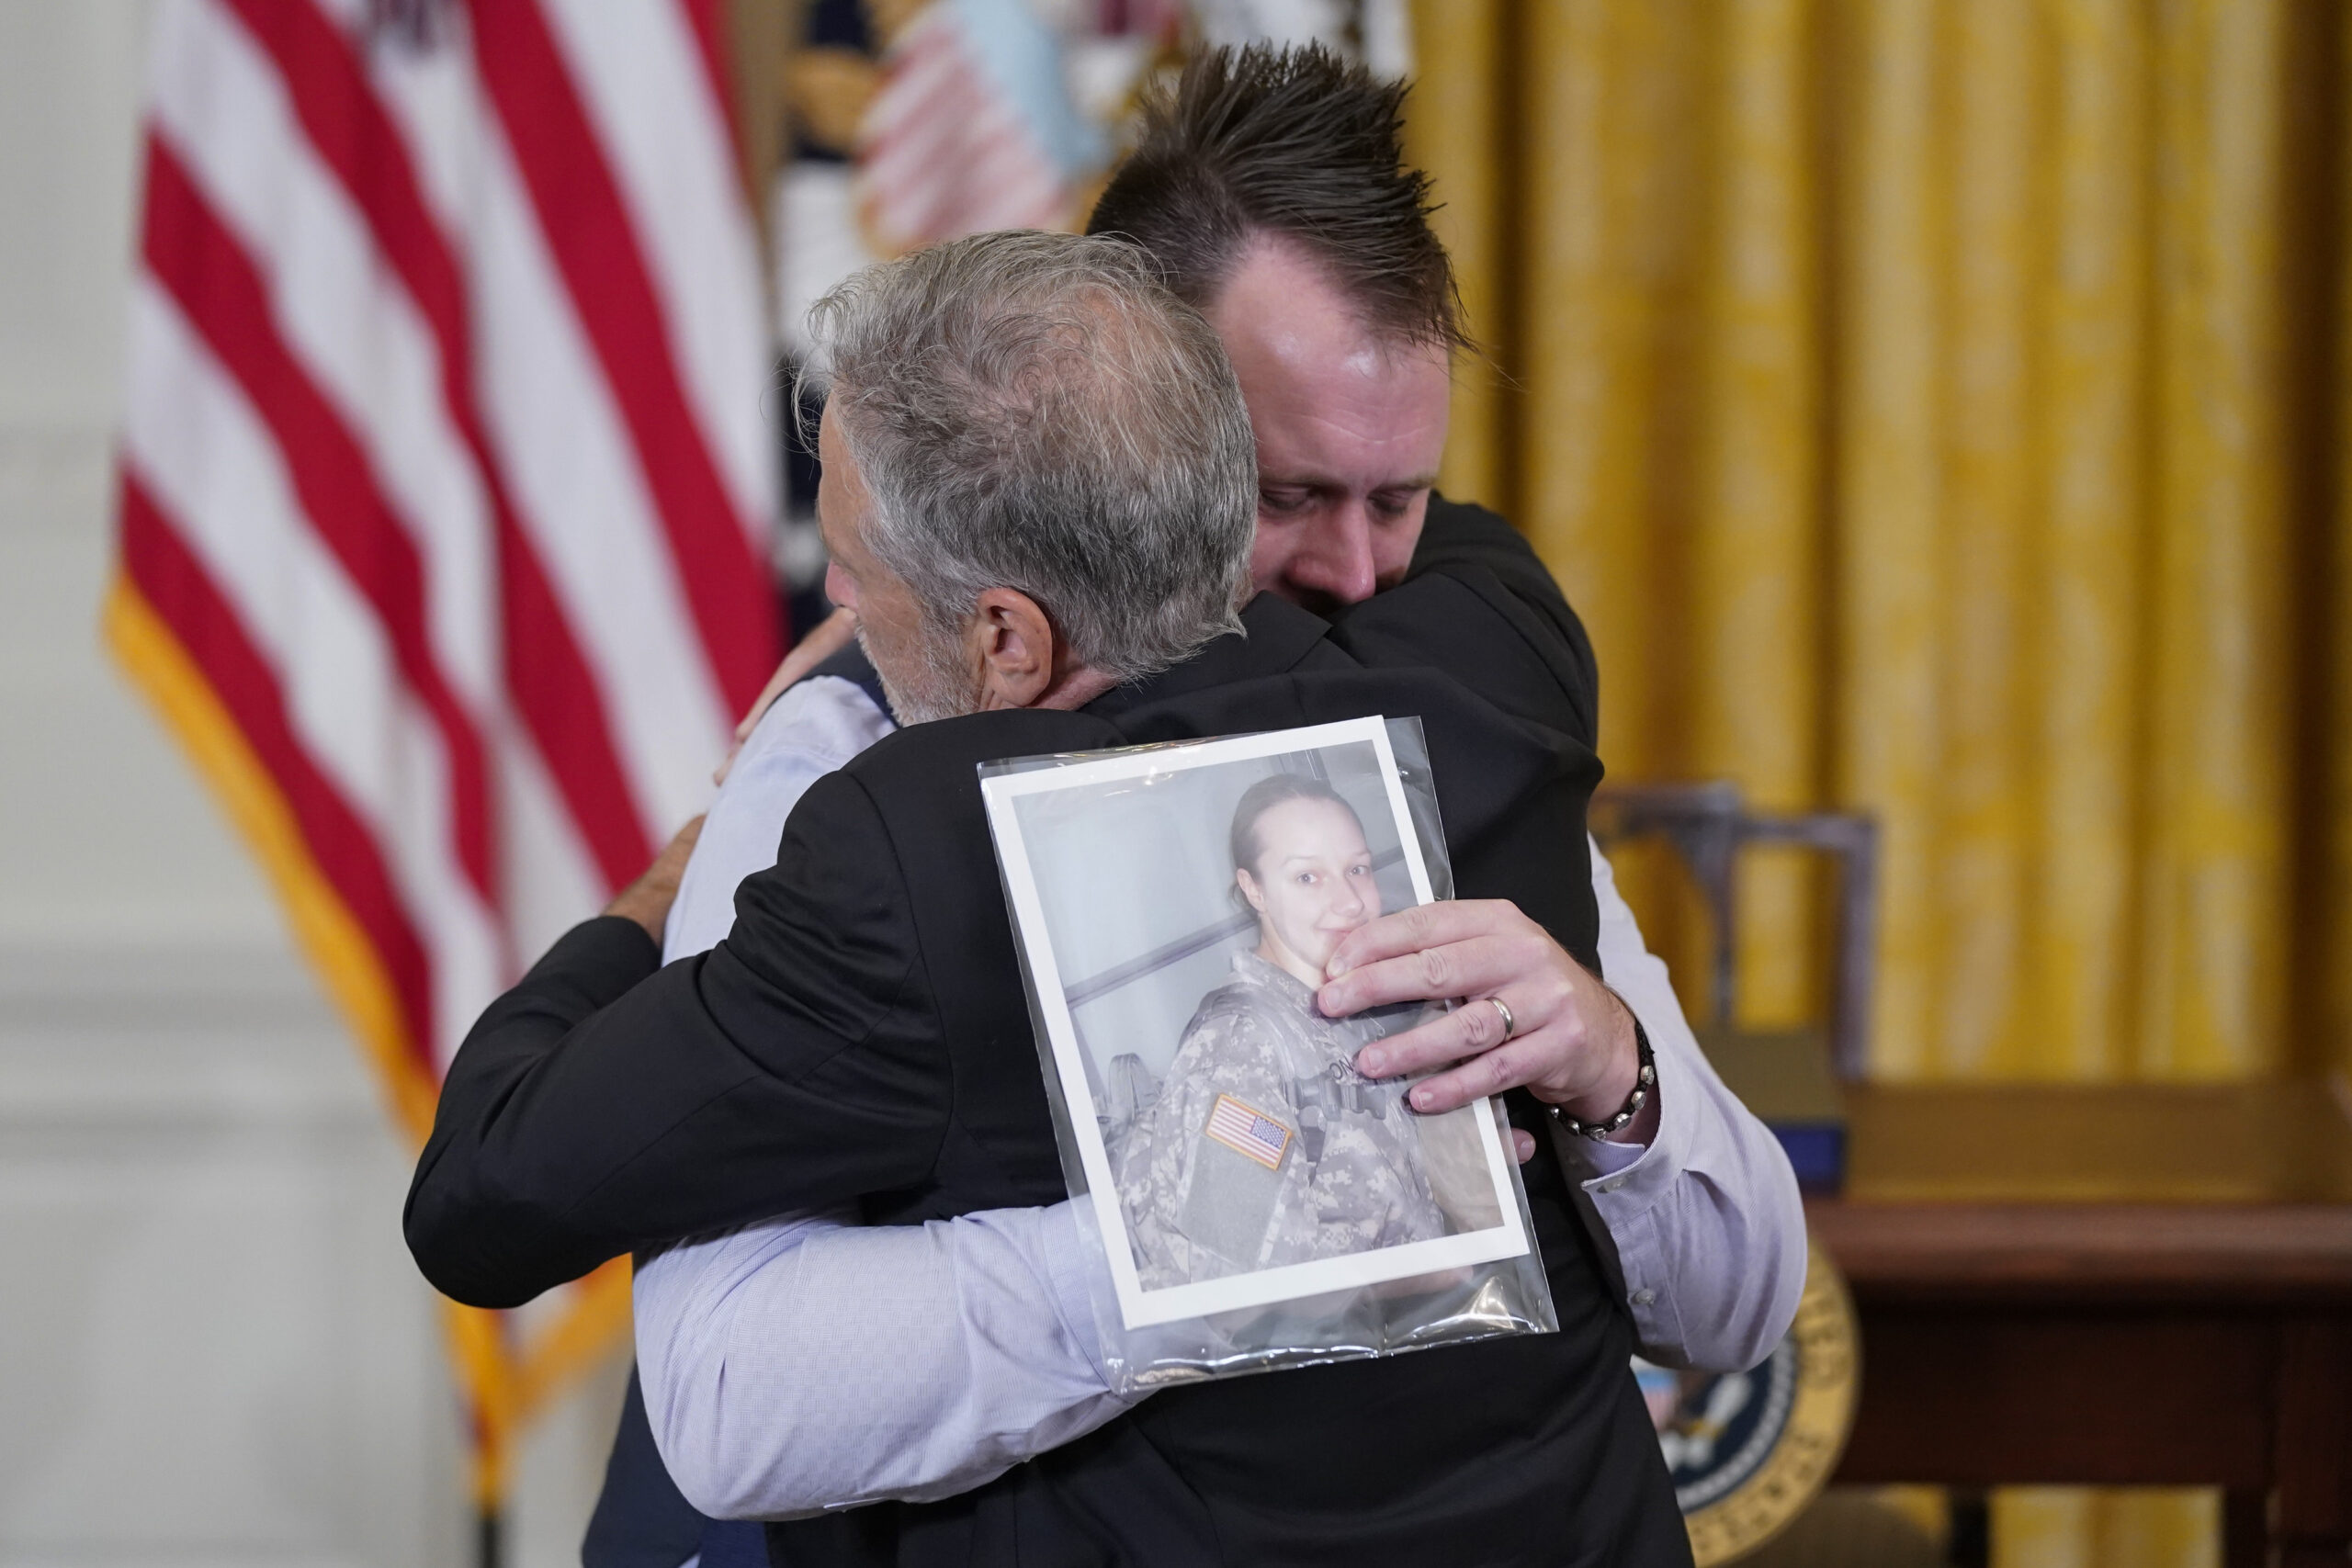 Comedian Jon Stewart hugs the husband of a veteran, whose picture the husband is holding